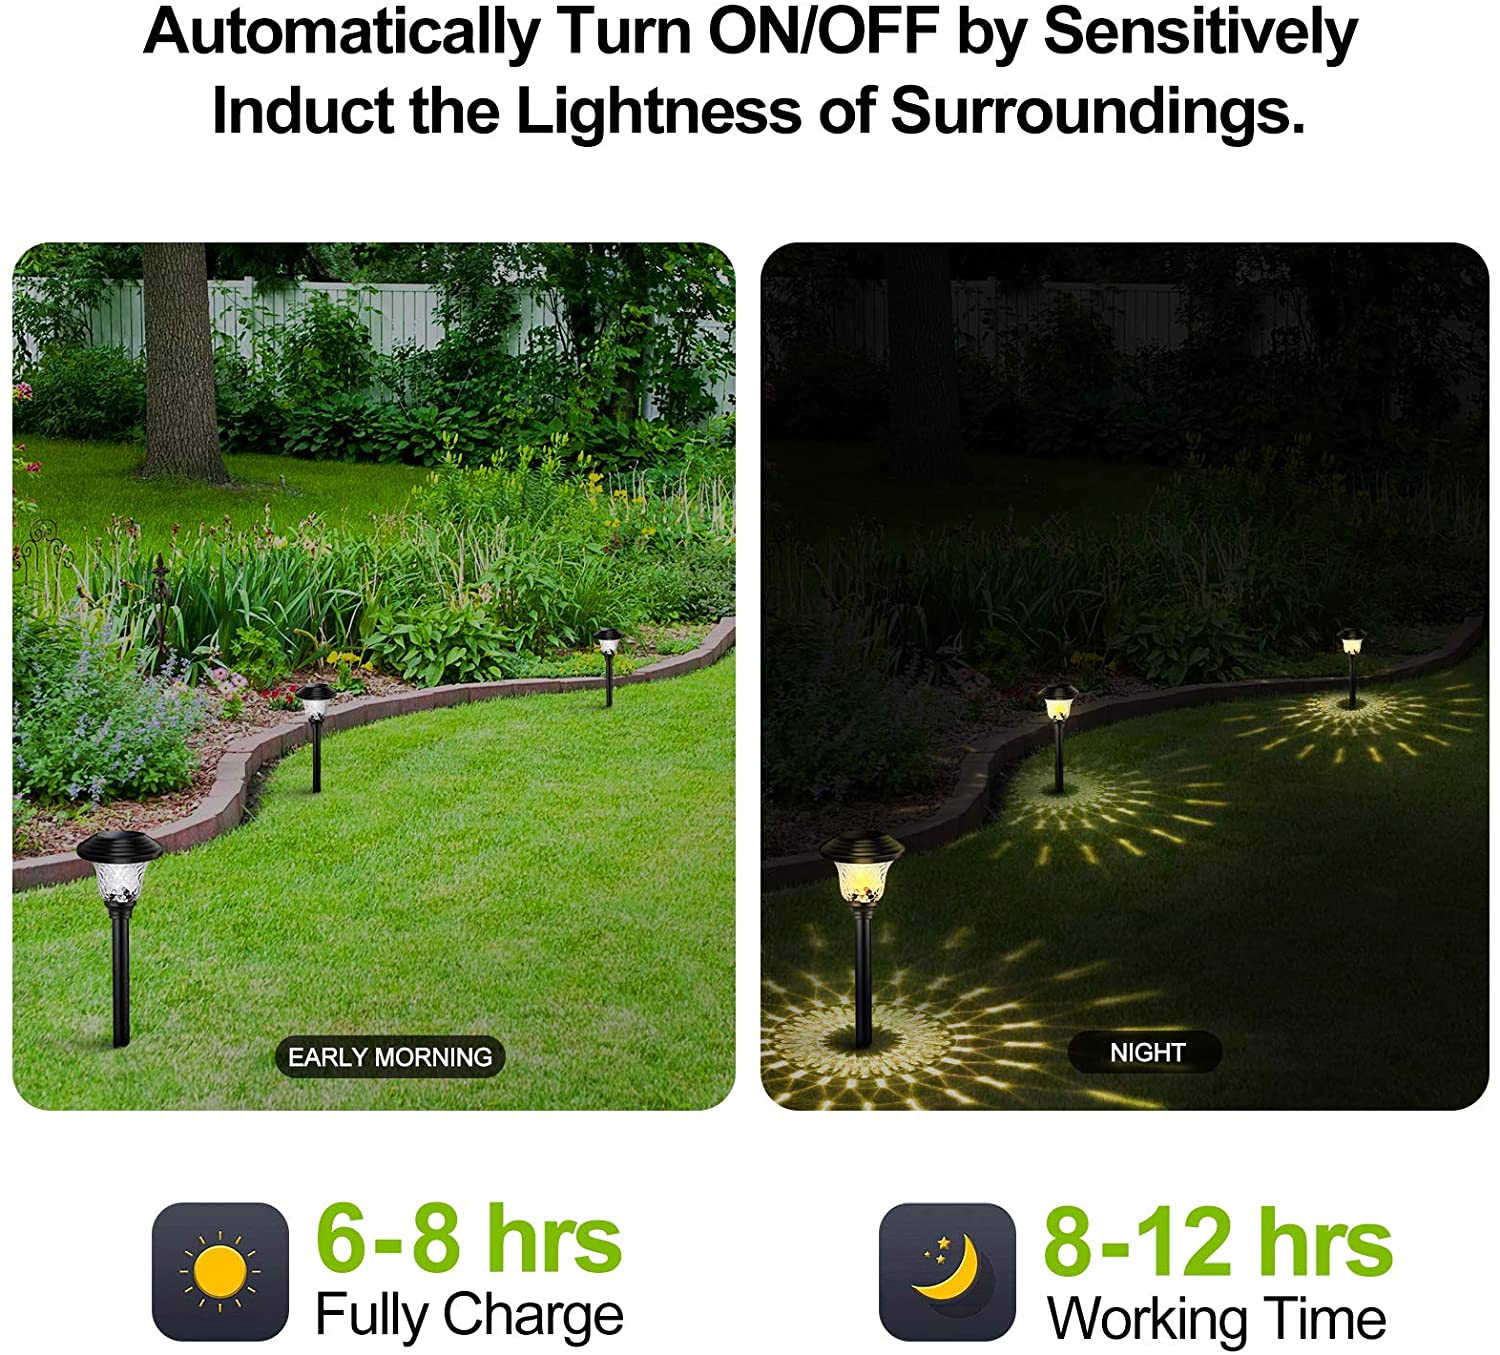 Stainless Steel LED Landscape Lighting for Yard Balhvit Glass Solar Lights Outdoor Up to 12 Hrs Long Last Auto On/Off Garden Lights Solar Powered Waterproof 8 Pack Super Bright Solar Pathway Lights 